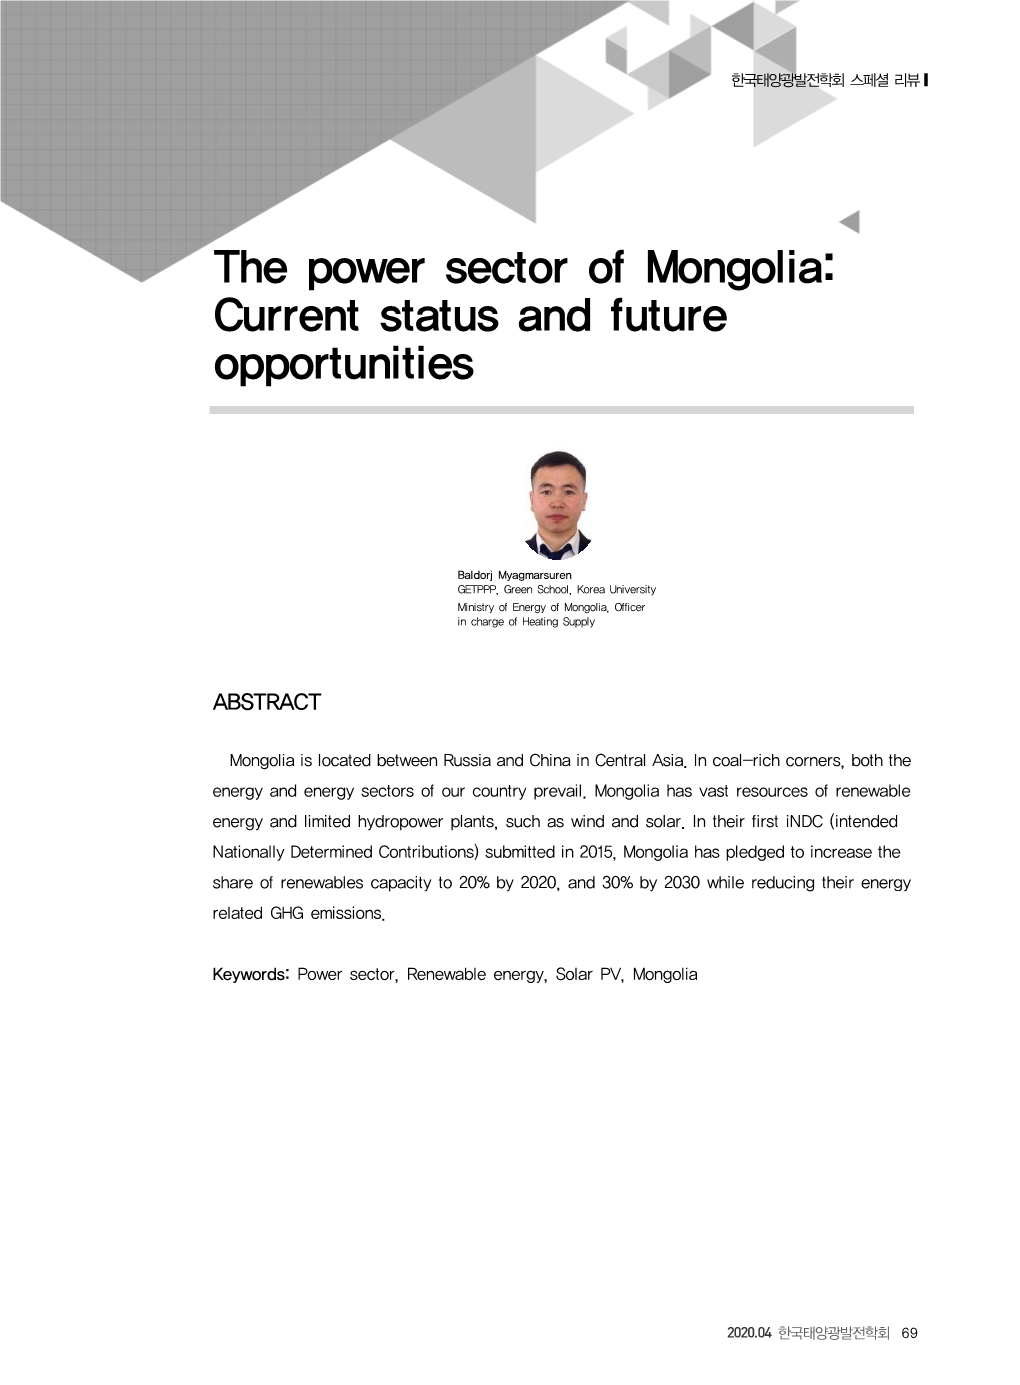 The Power Sector of Mongolia: Current Status and Future Opportunities